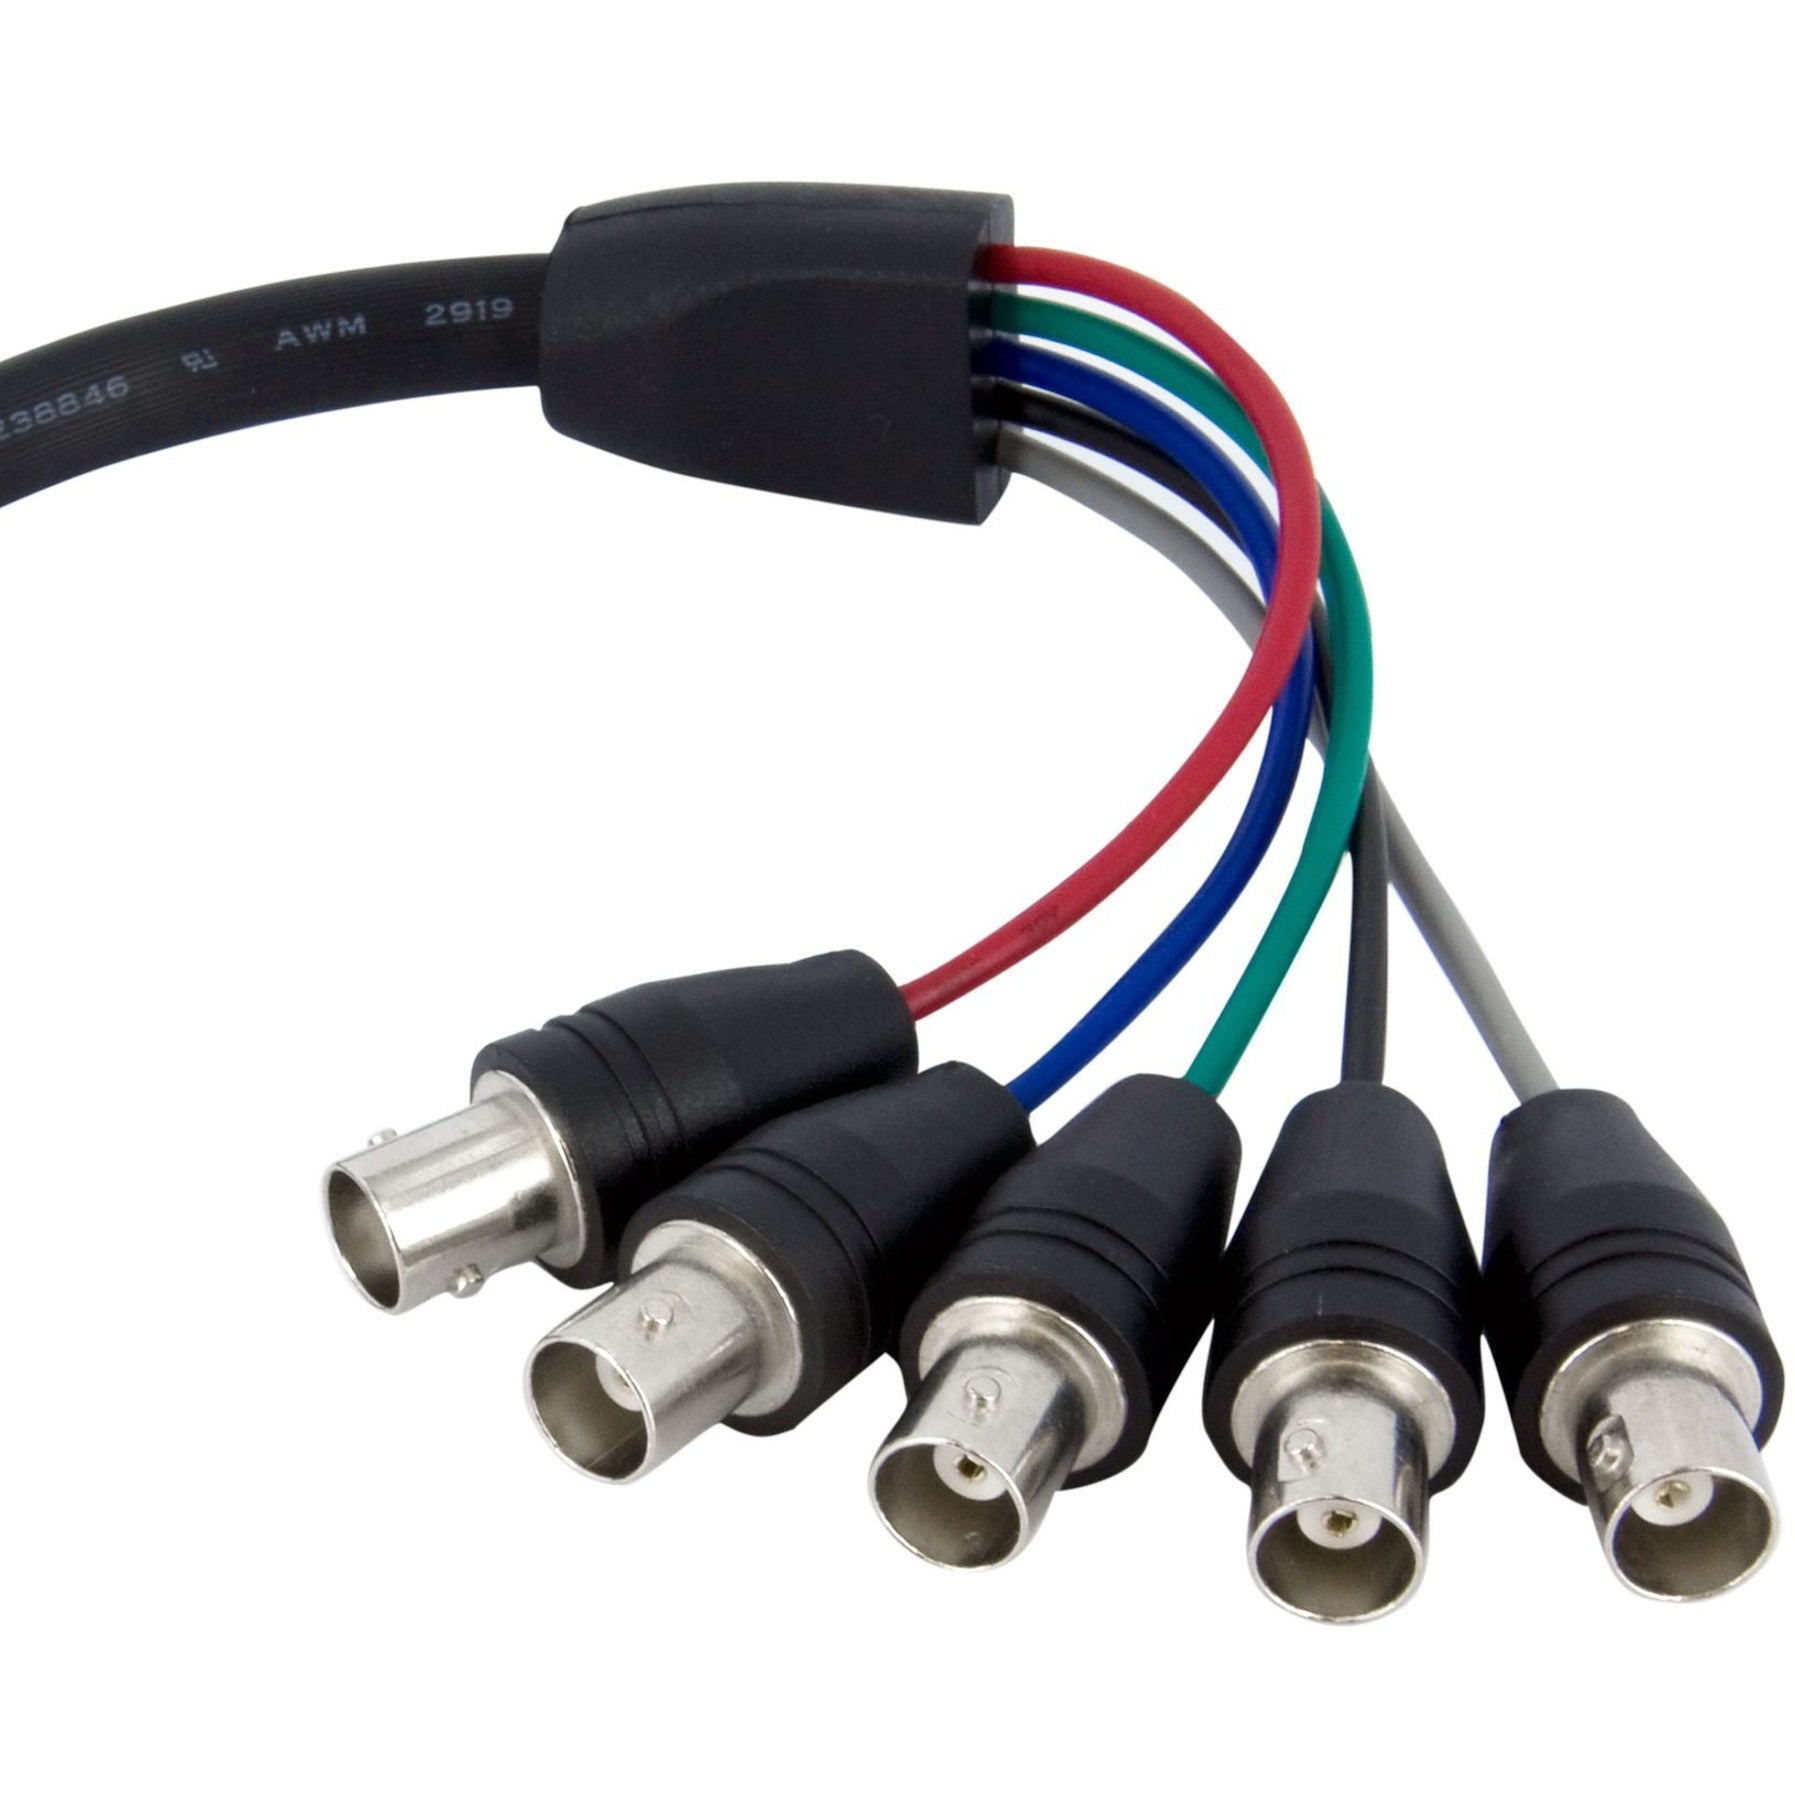 StarTech.com VGABNCMF1 1 ft Coax HD15 VGA to 5 BNC RGBHV Monitor Cable, Copper Conductor, CMG Rated